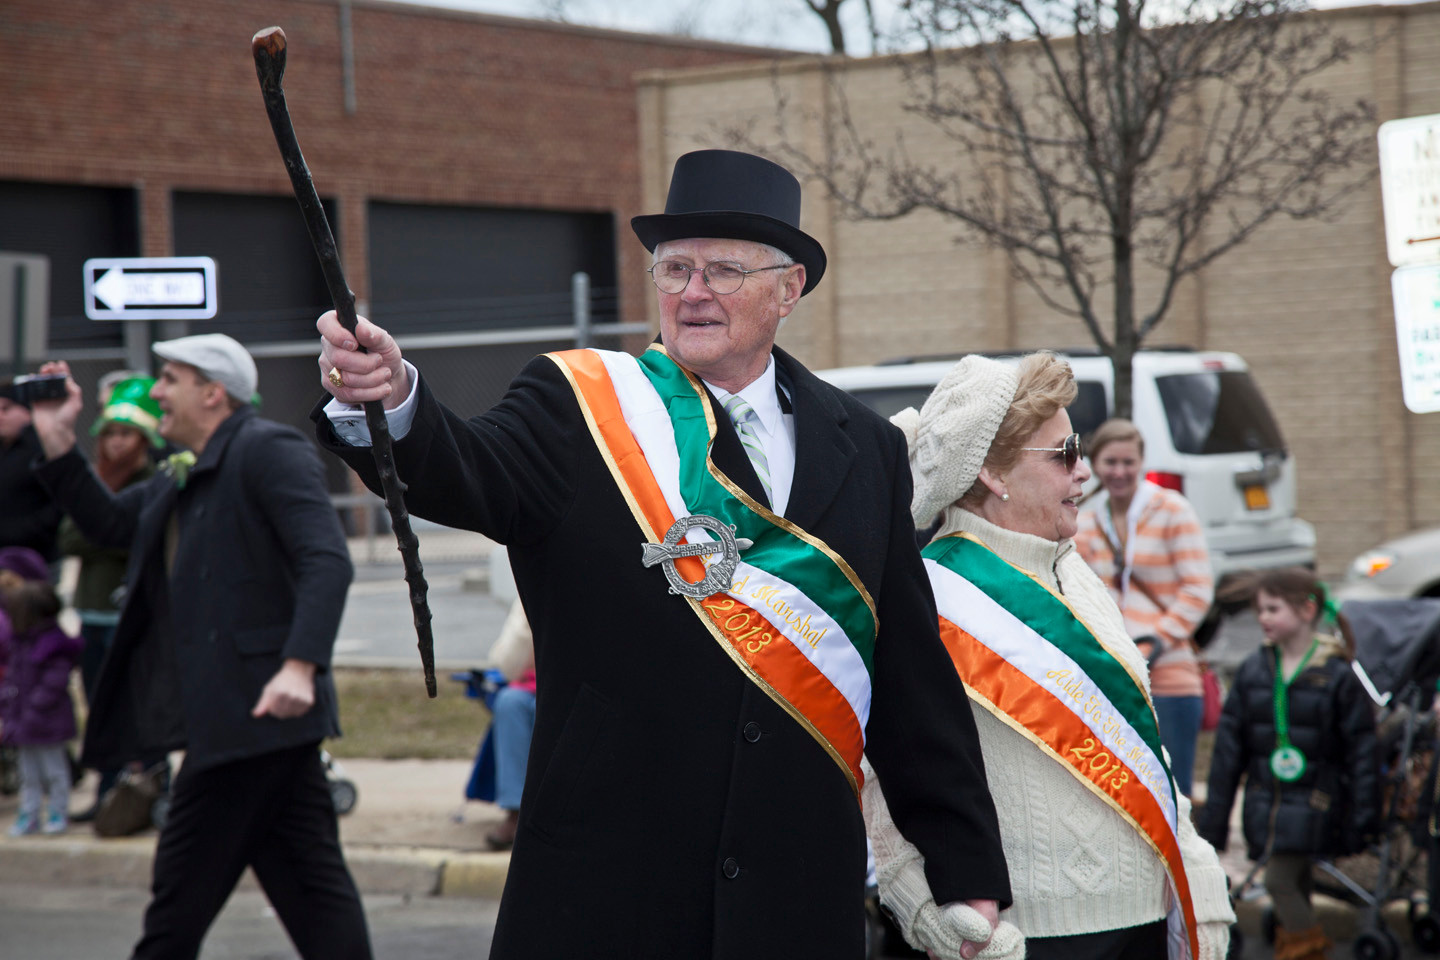 Leading the marchers: Grand Marshal Thomas Glynn with his wife, Eileen.